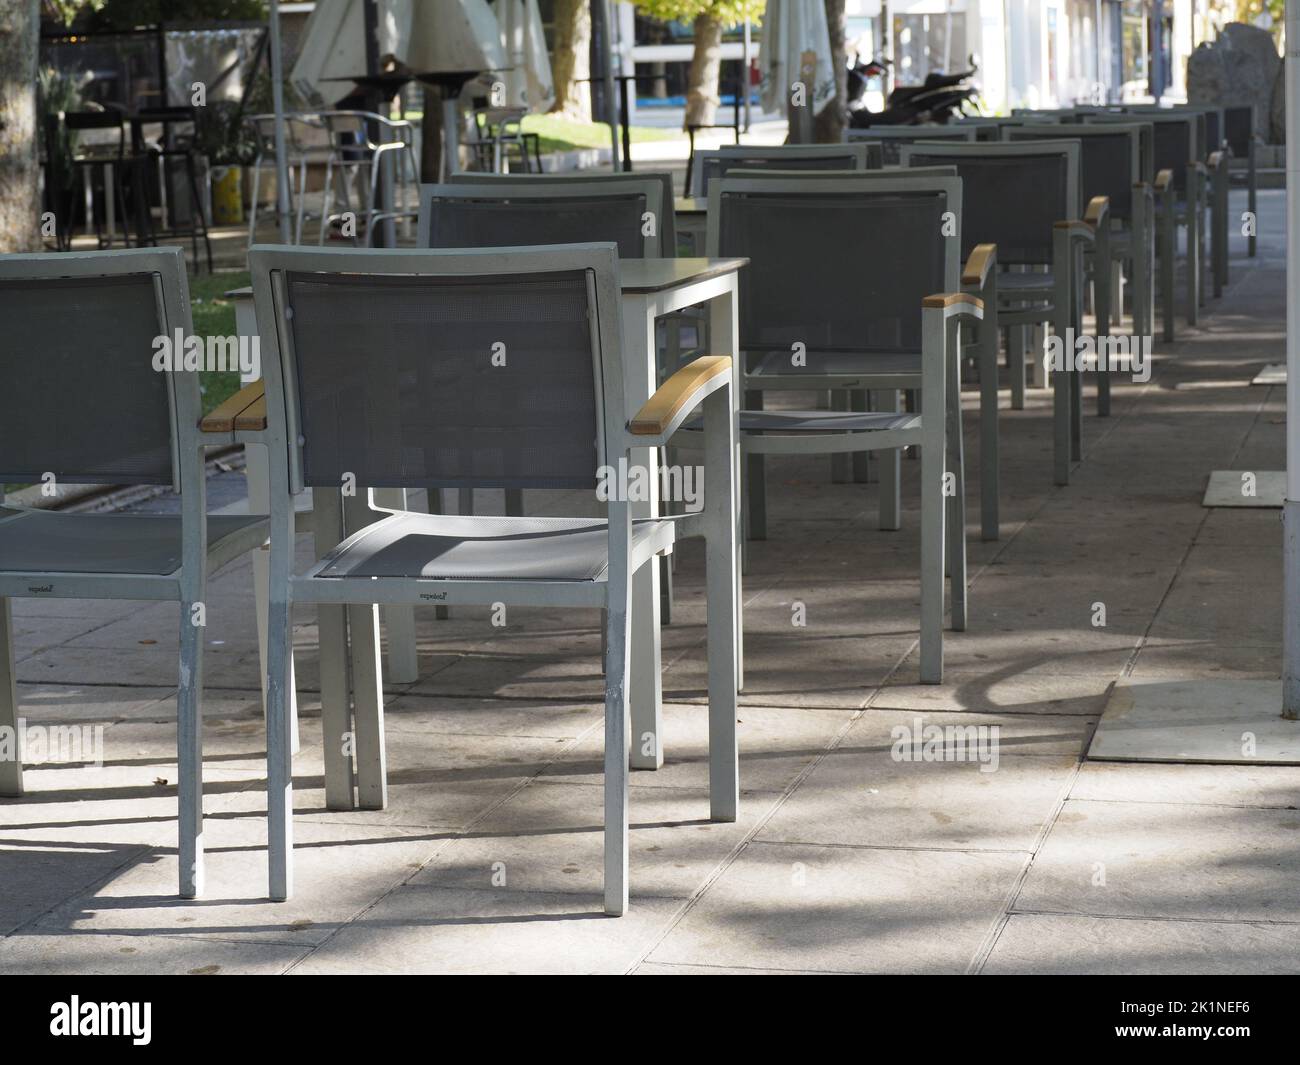 terrace of a cafe deserted due to the effects of inflation. Stock Photo